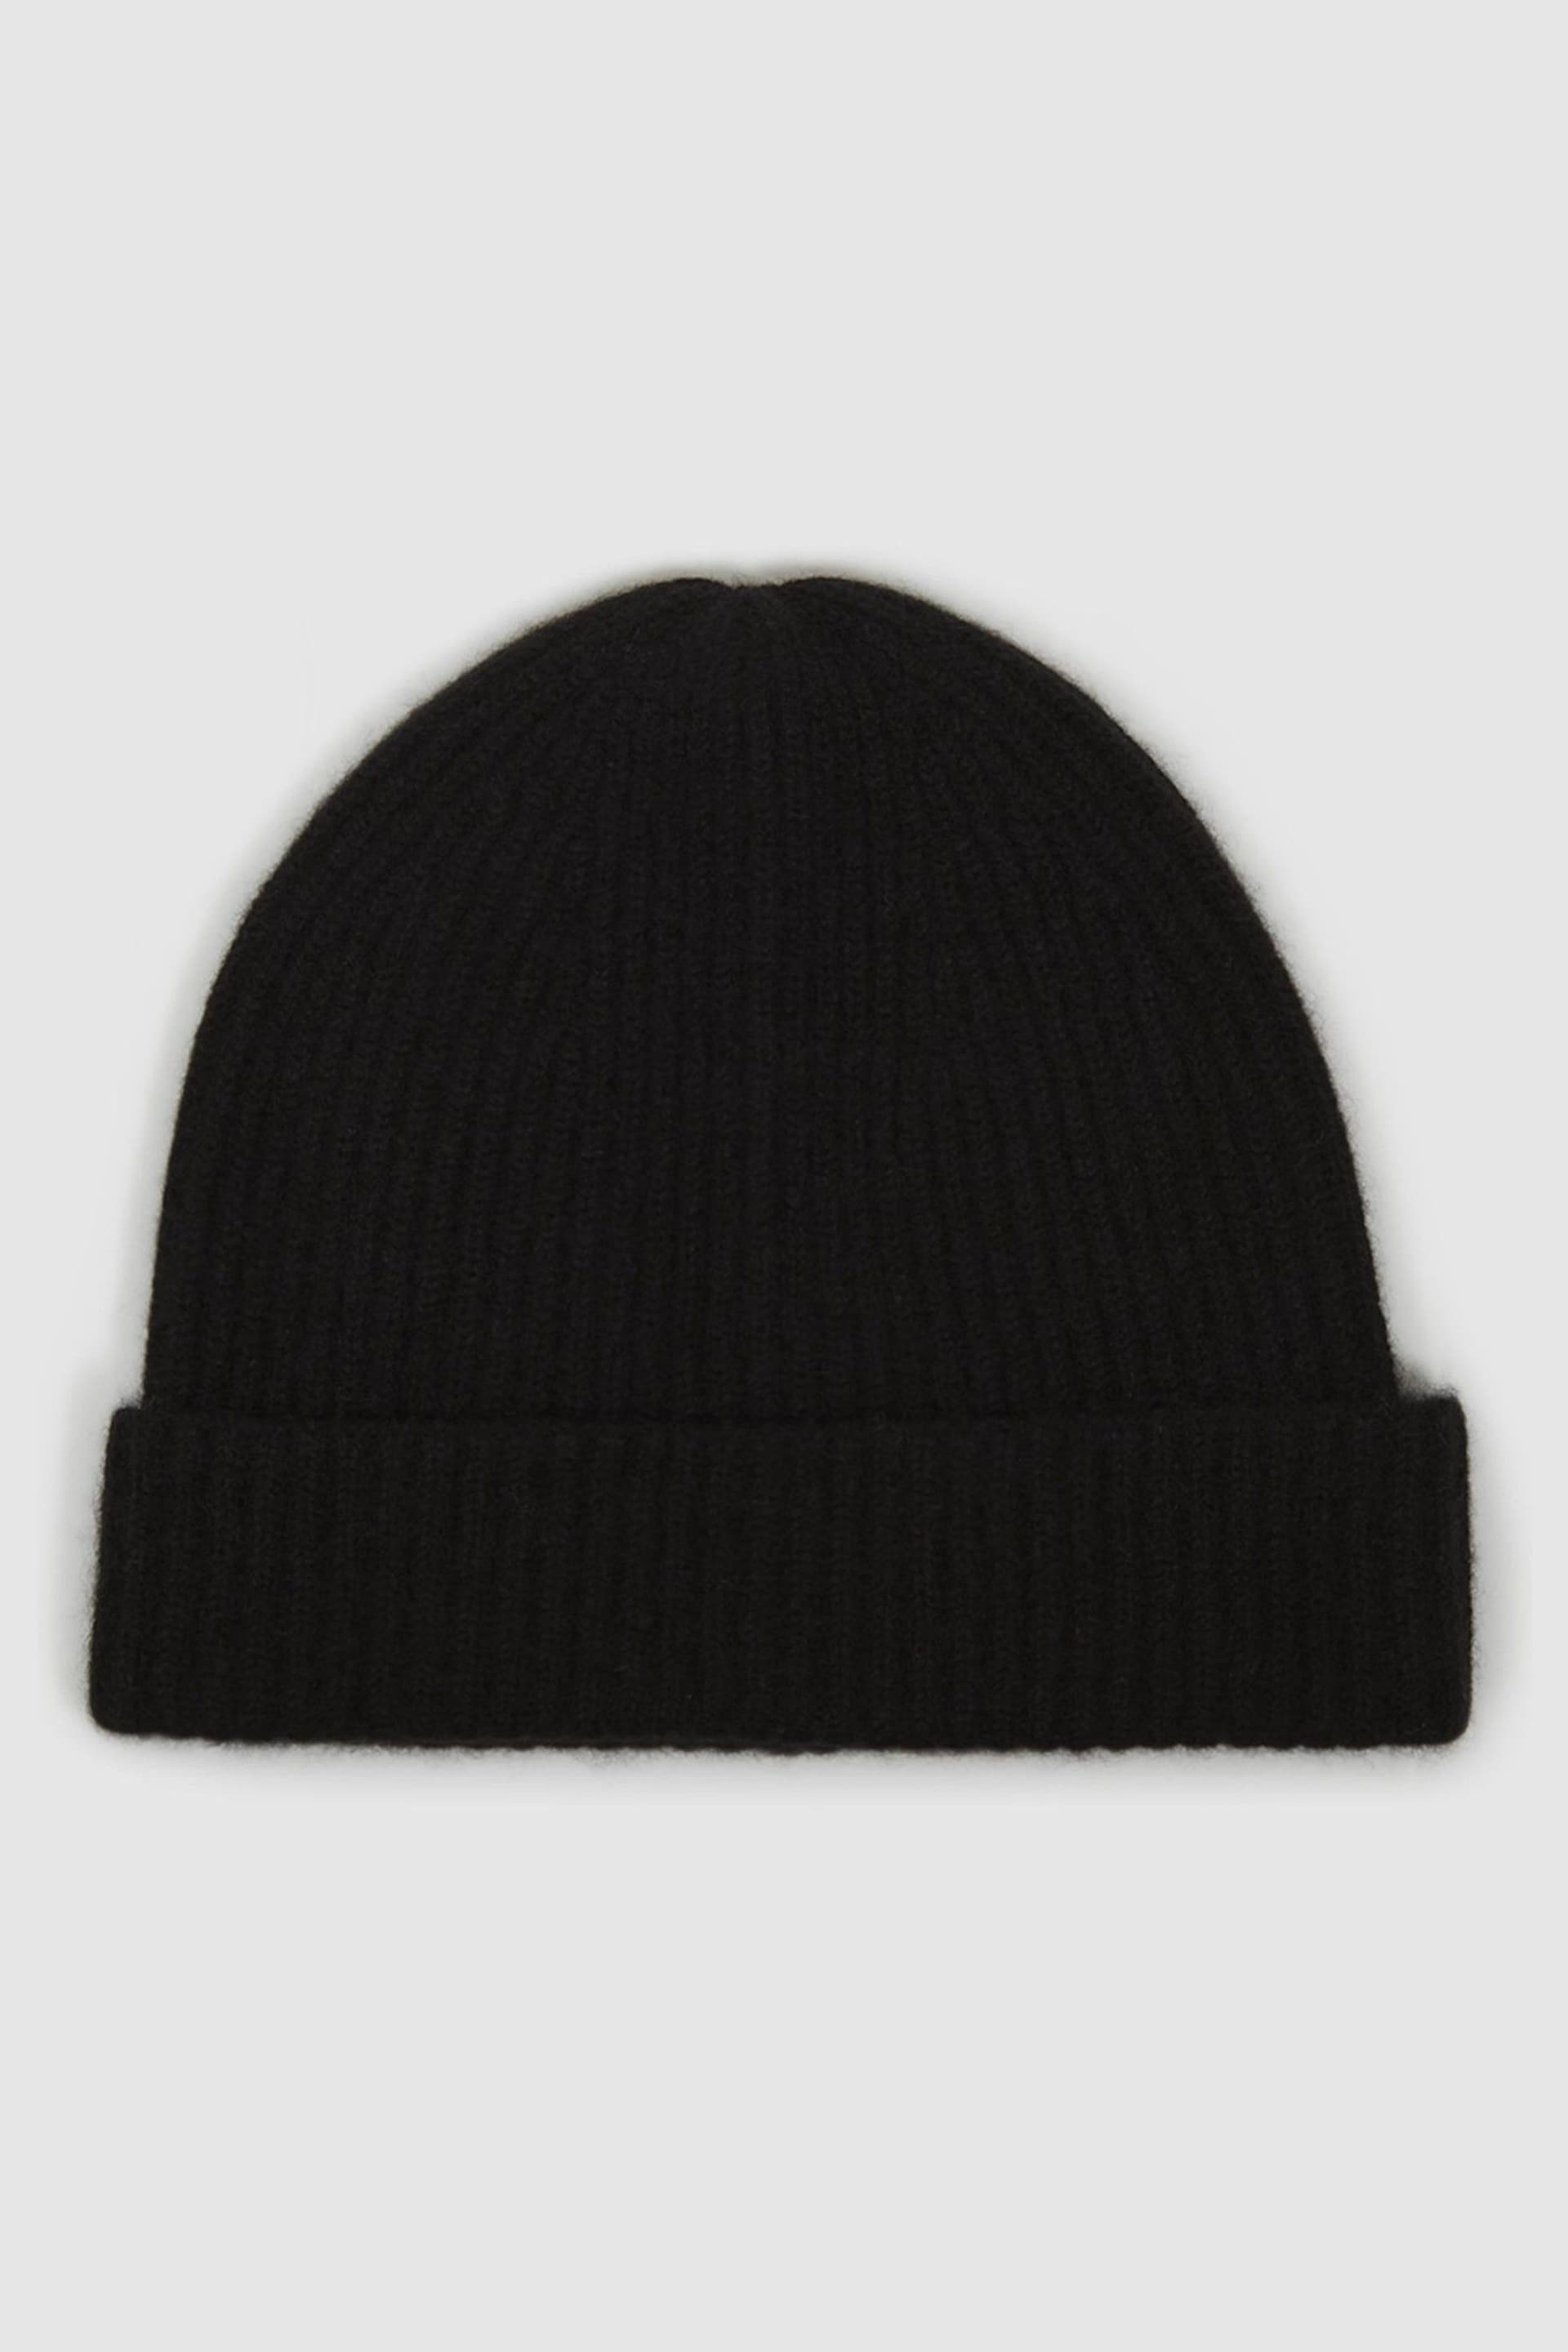 Reiss Black Cara Cashmere Ribbed Beanie Hat - Image 1 of 3